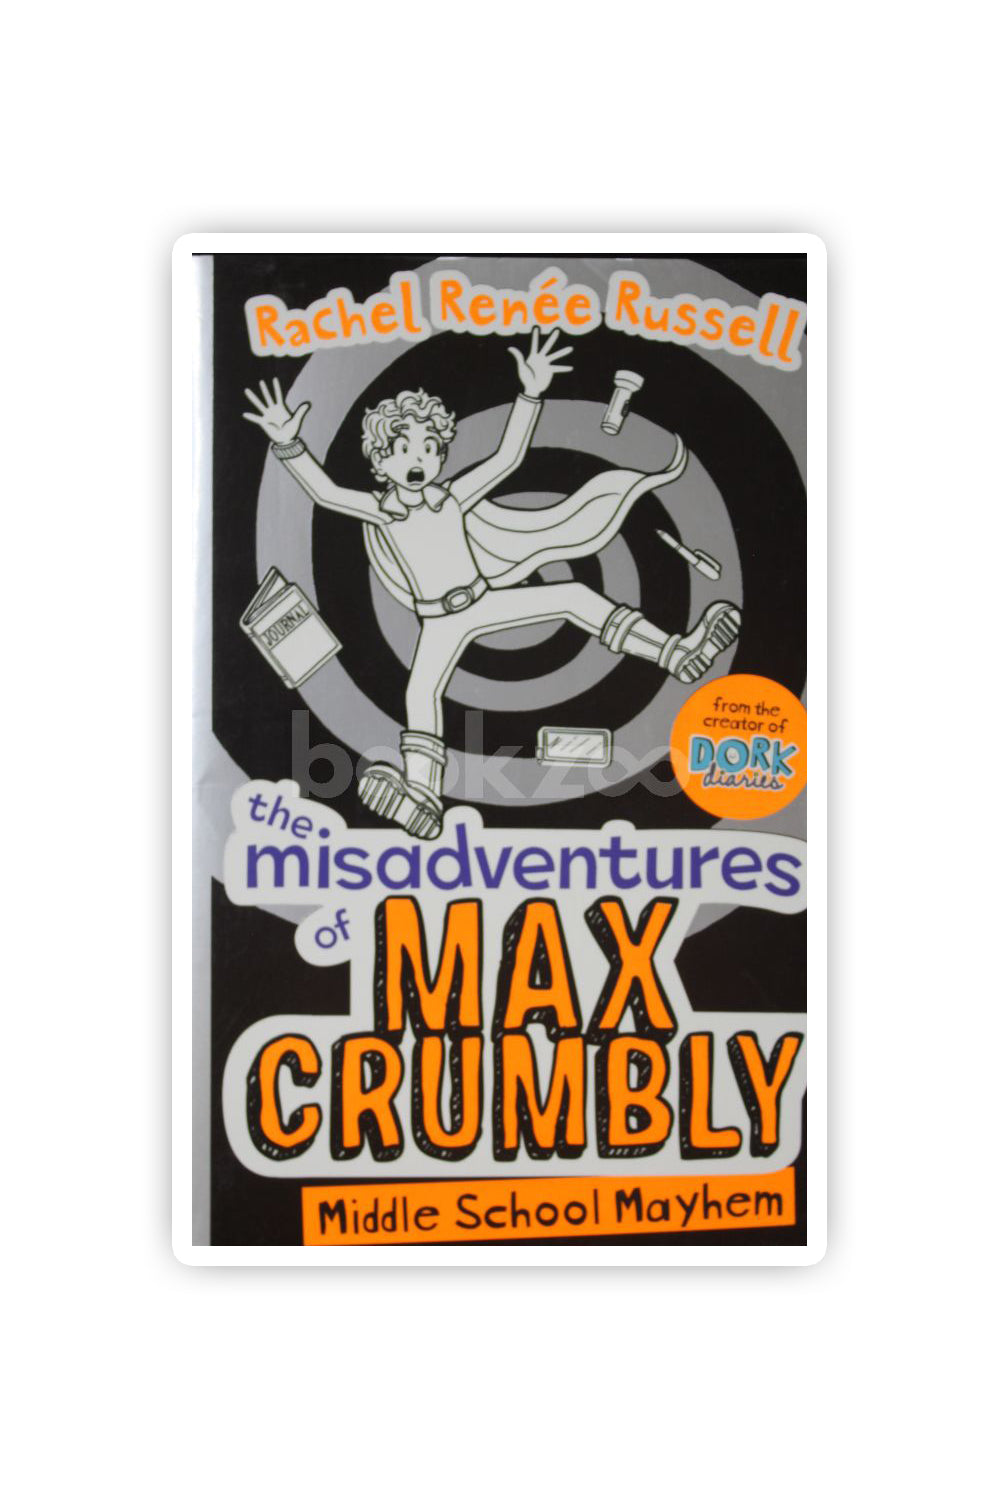 Misadventures　by　at　2:　of　bookstore　Renée　Russell　Buy　Crumbly　Mayhem　Middle　School　The　Max　—　Rachel　Online